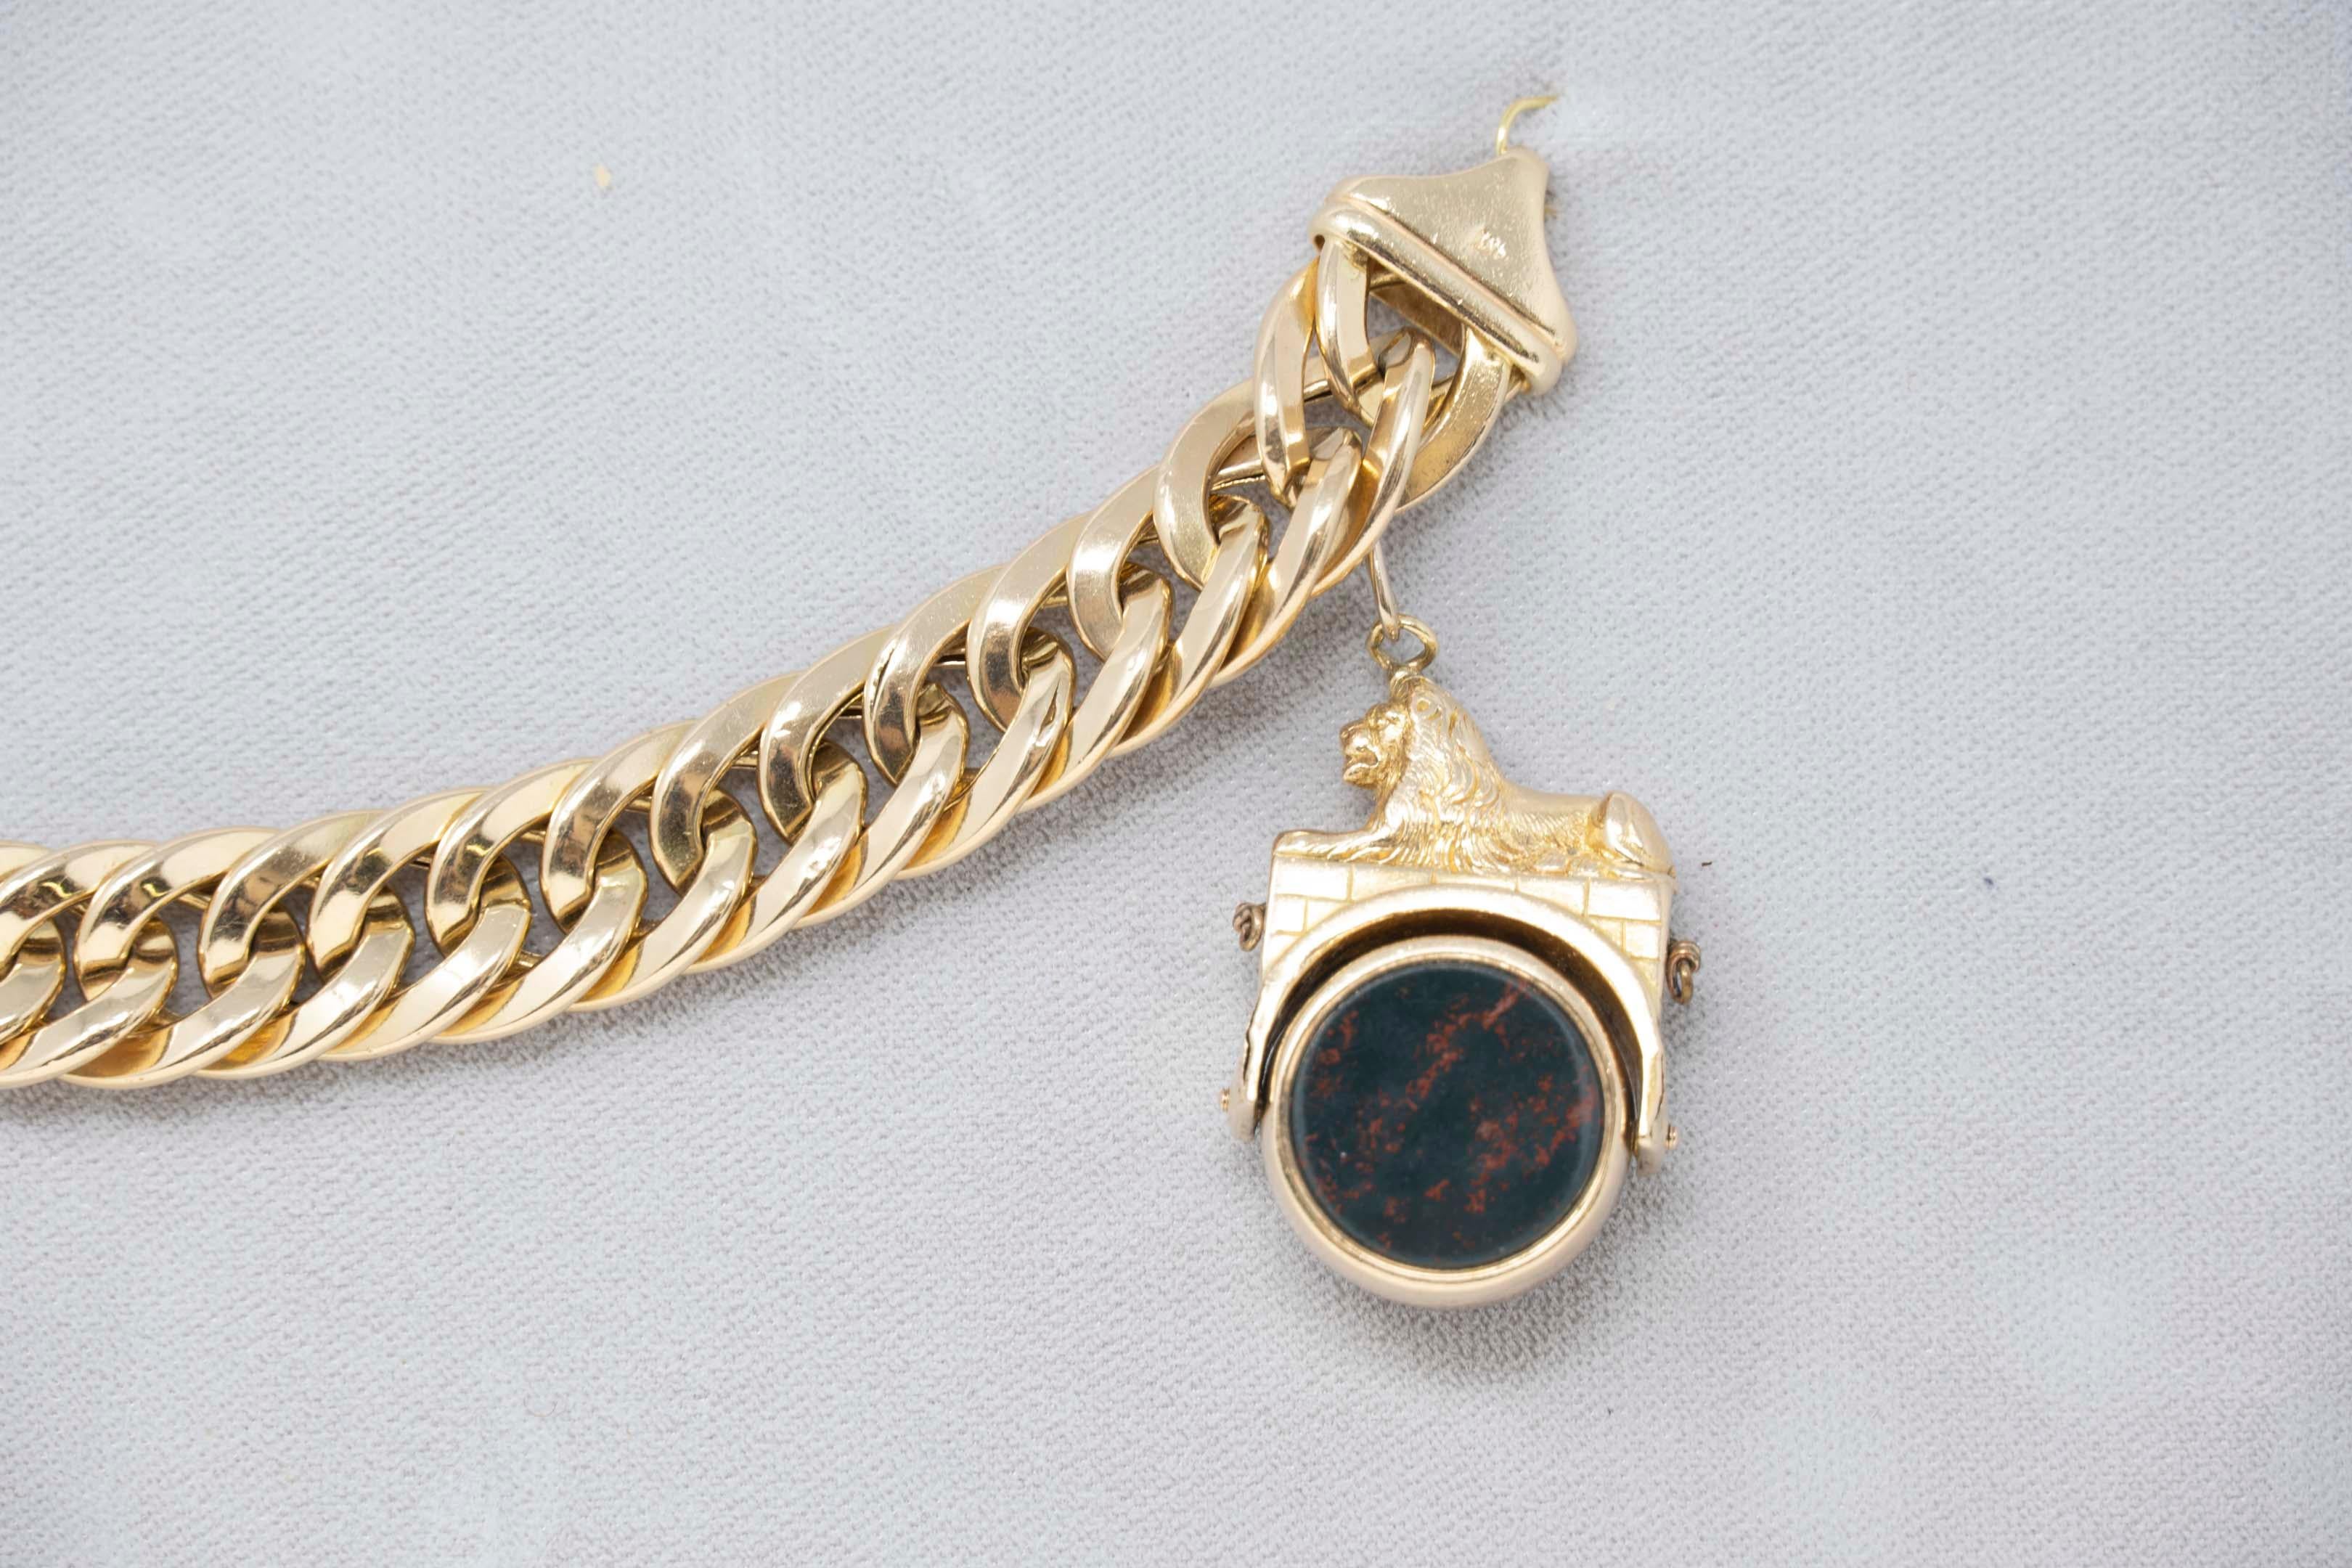 Statement 14k gold bracelet with bloodstone and conch shell spin FOB pendant. Early 20th century, the lion figural spinning FOB is probably earlier. Bracelet stamped 14k Italy, weighs 54.7 grams. Measures 7 1/2 inches long.
